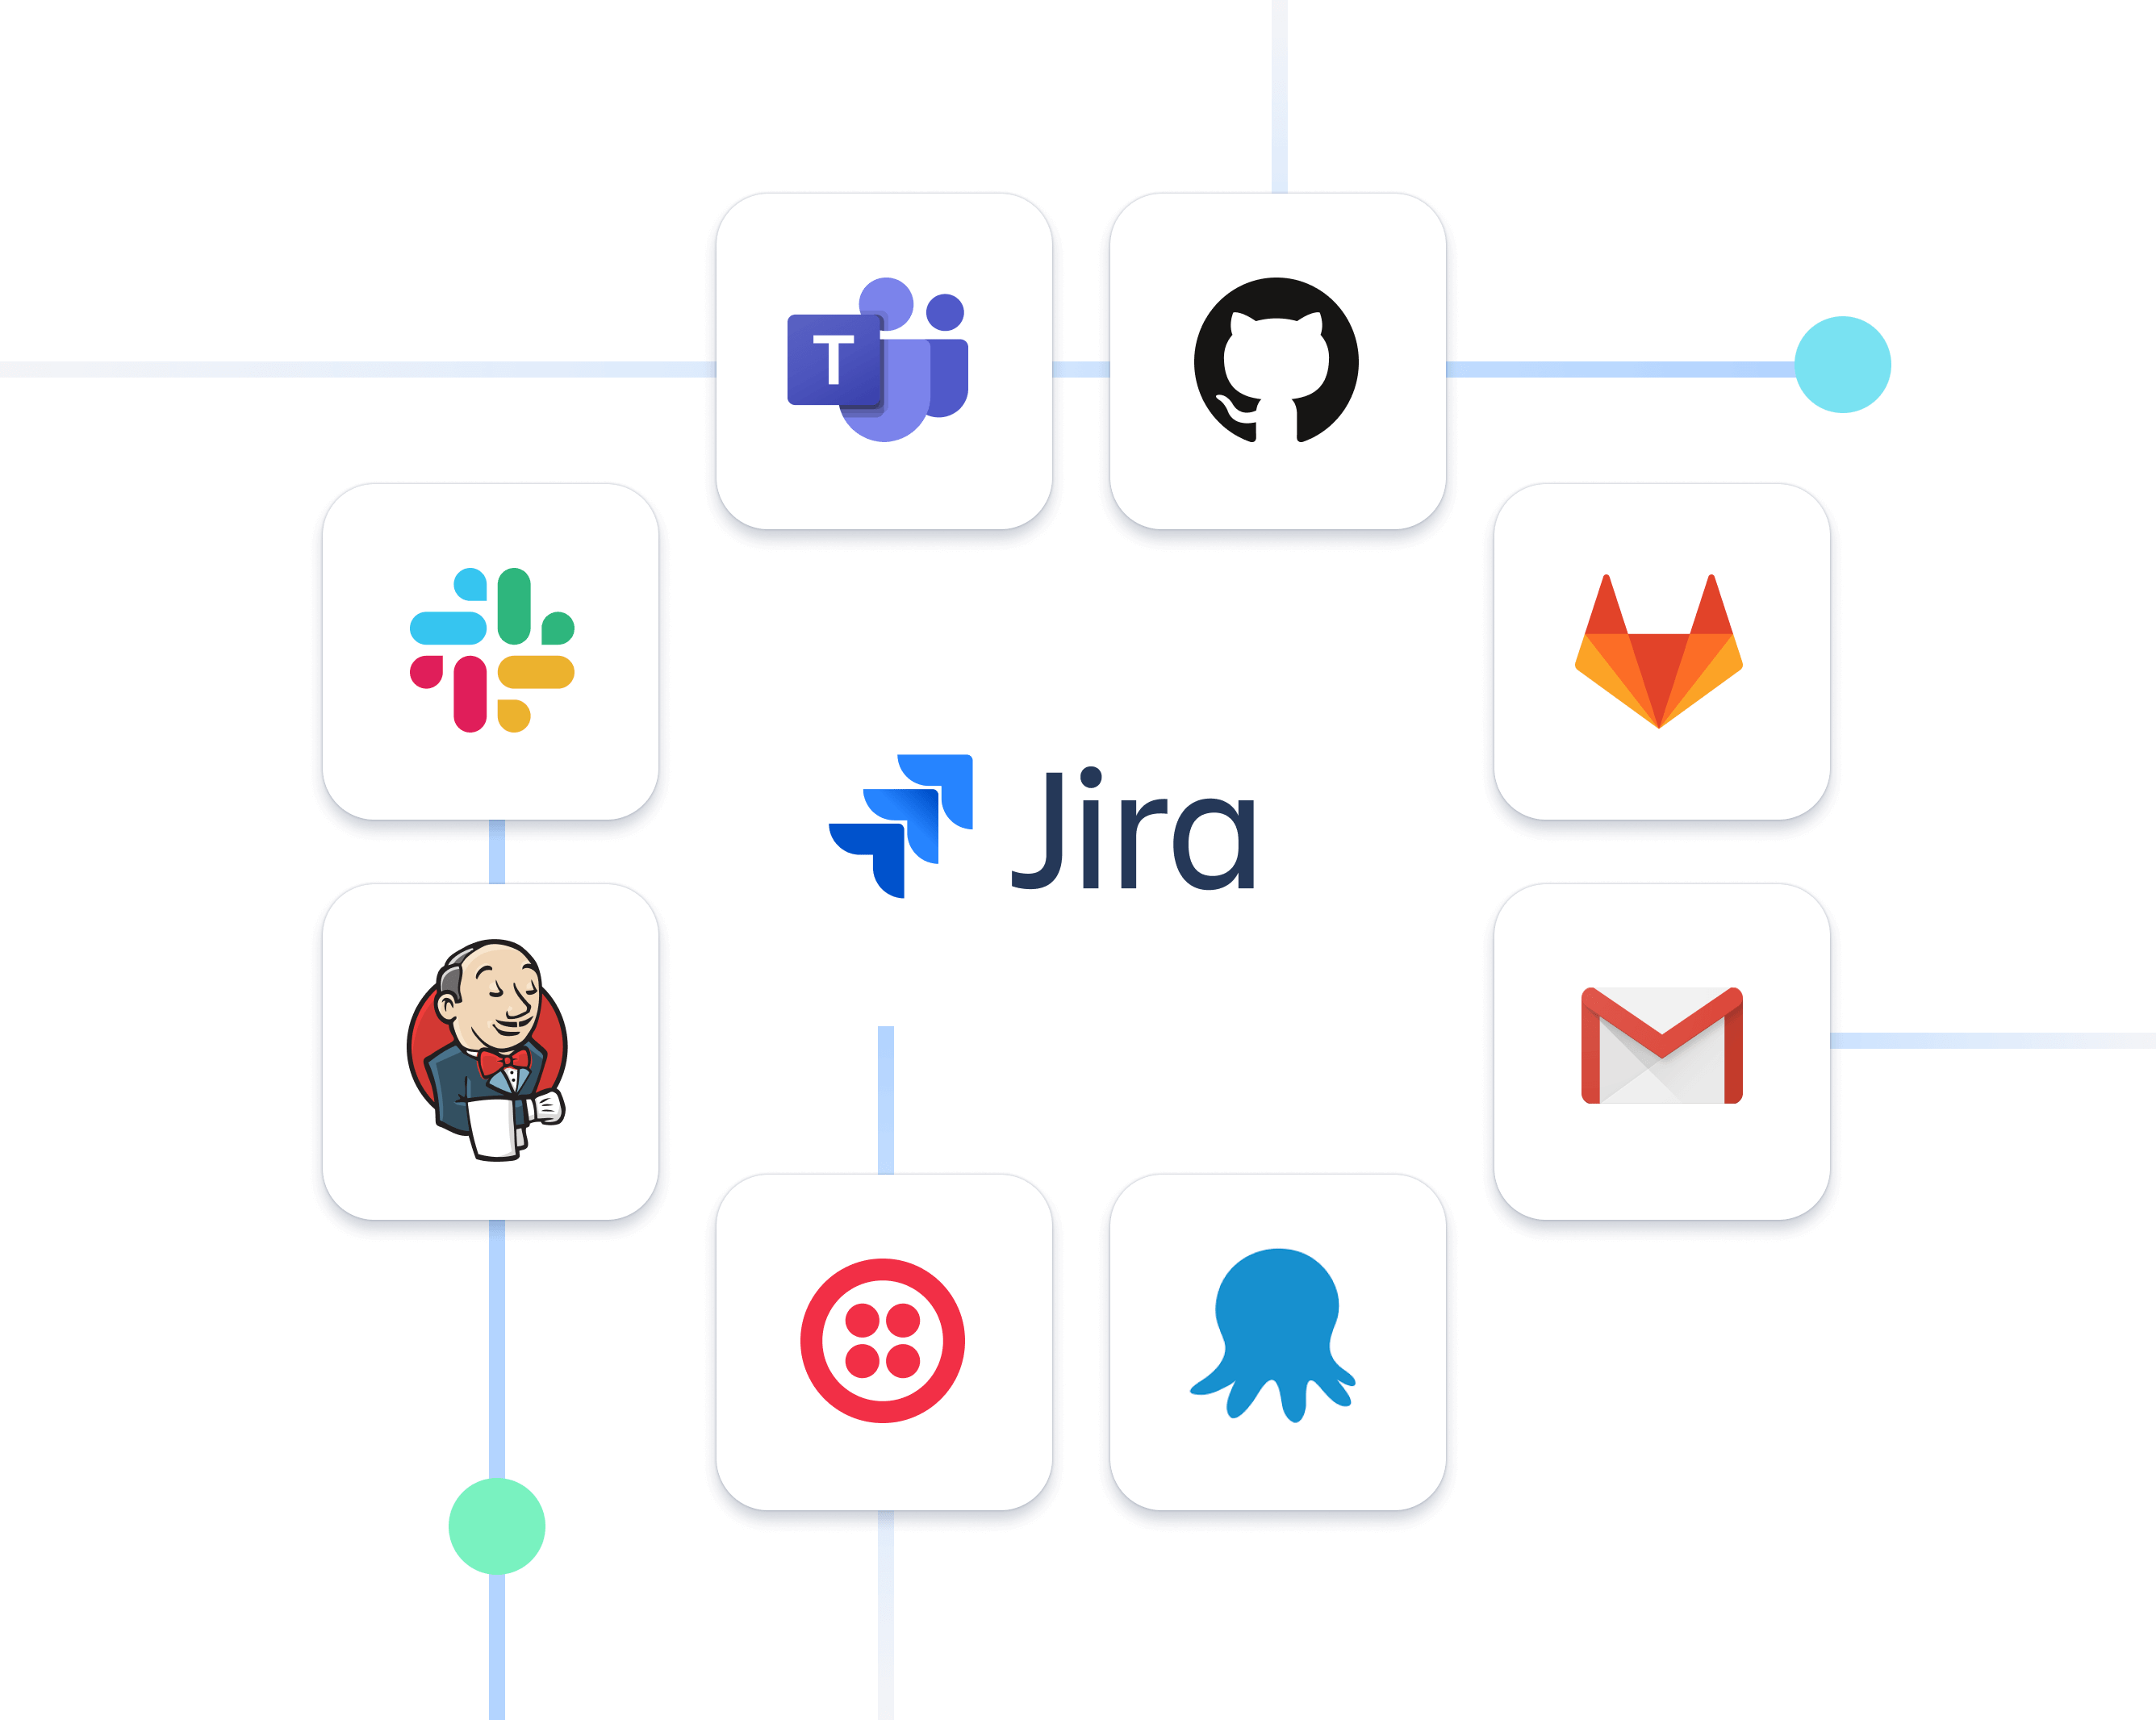 Logos of third party tools like Slack and Github showing how automation connects tools.